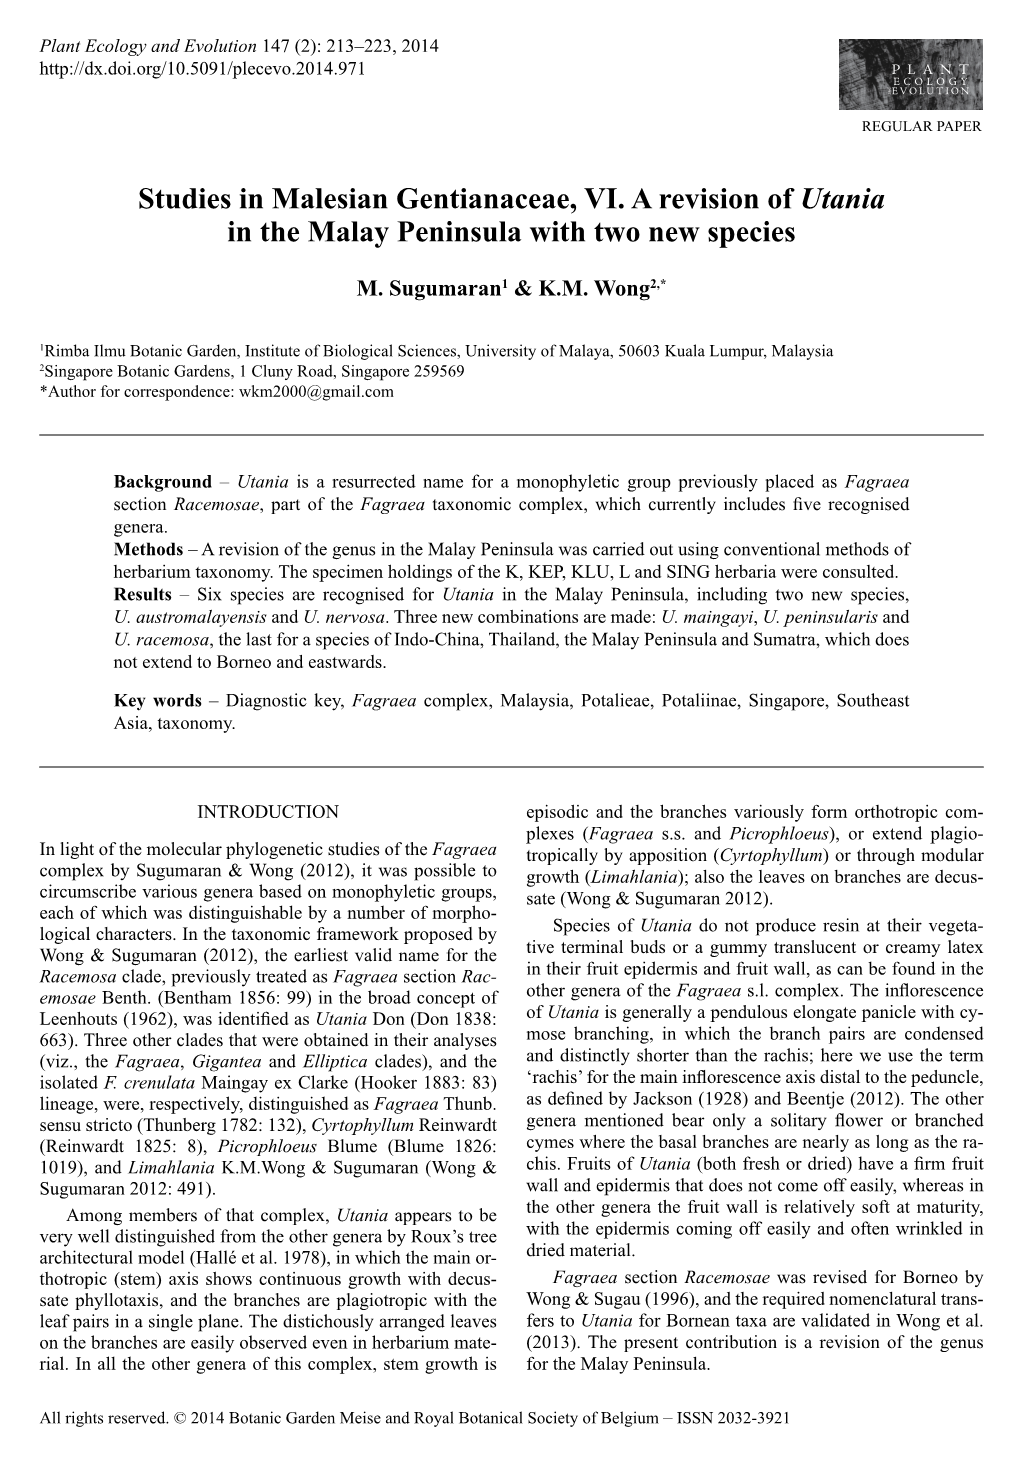 Studies in Malesian Gentianaceae, VI. a Revision of &lt;I&gt;Utania&lt;/I&gt; in the Malay Peninsula with Two New Species